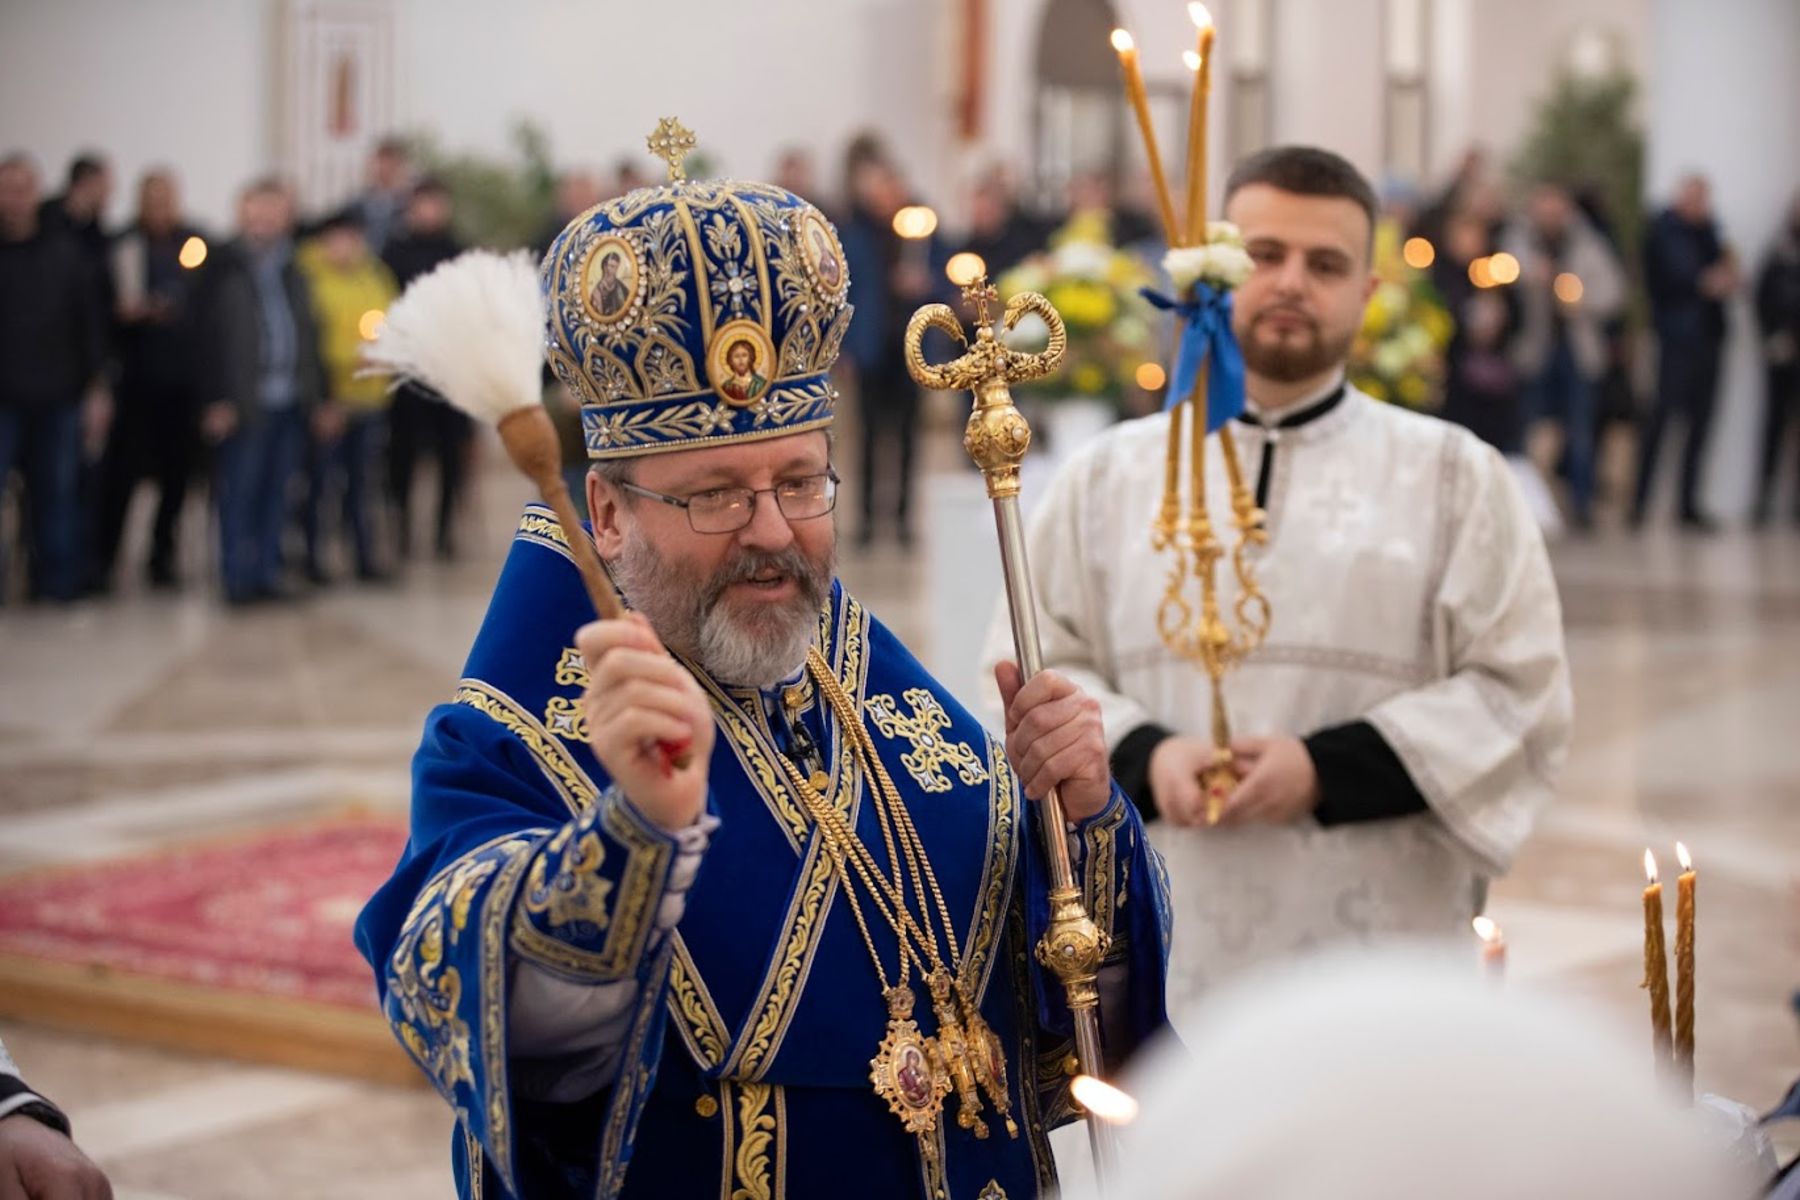 “Let the candles of Stritennya ignite hope within us for the victory of Ukraine”: Head of the UGCC on the Feast of the Presentation